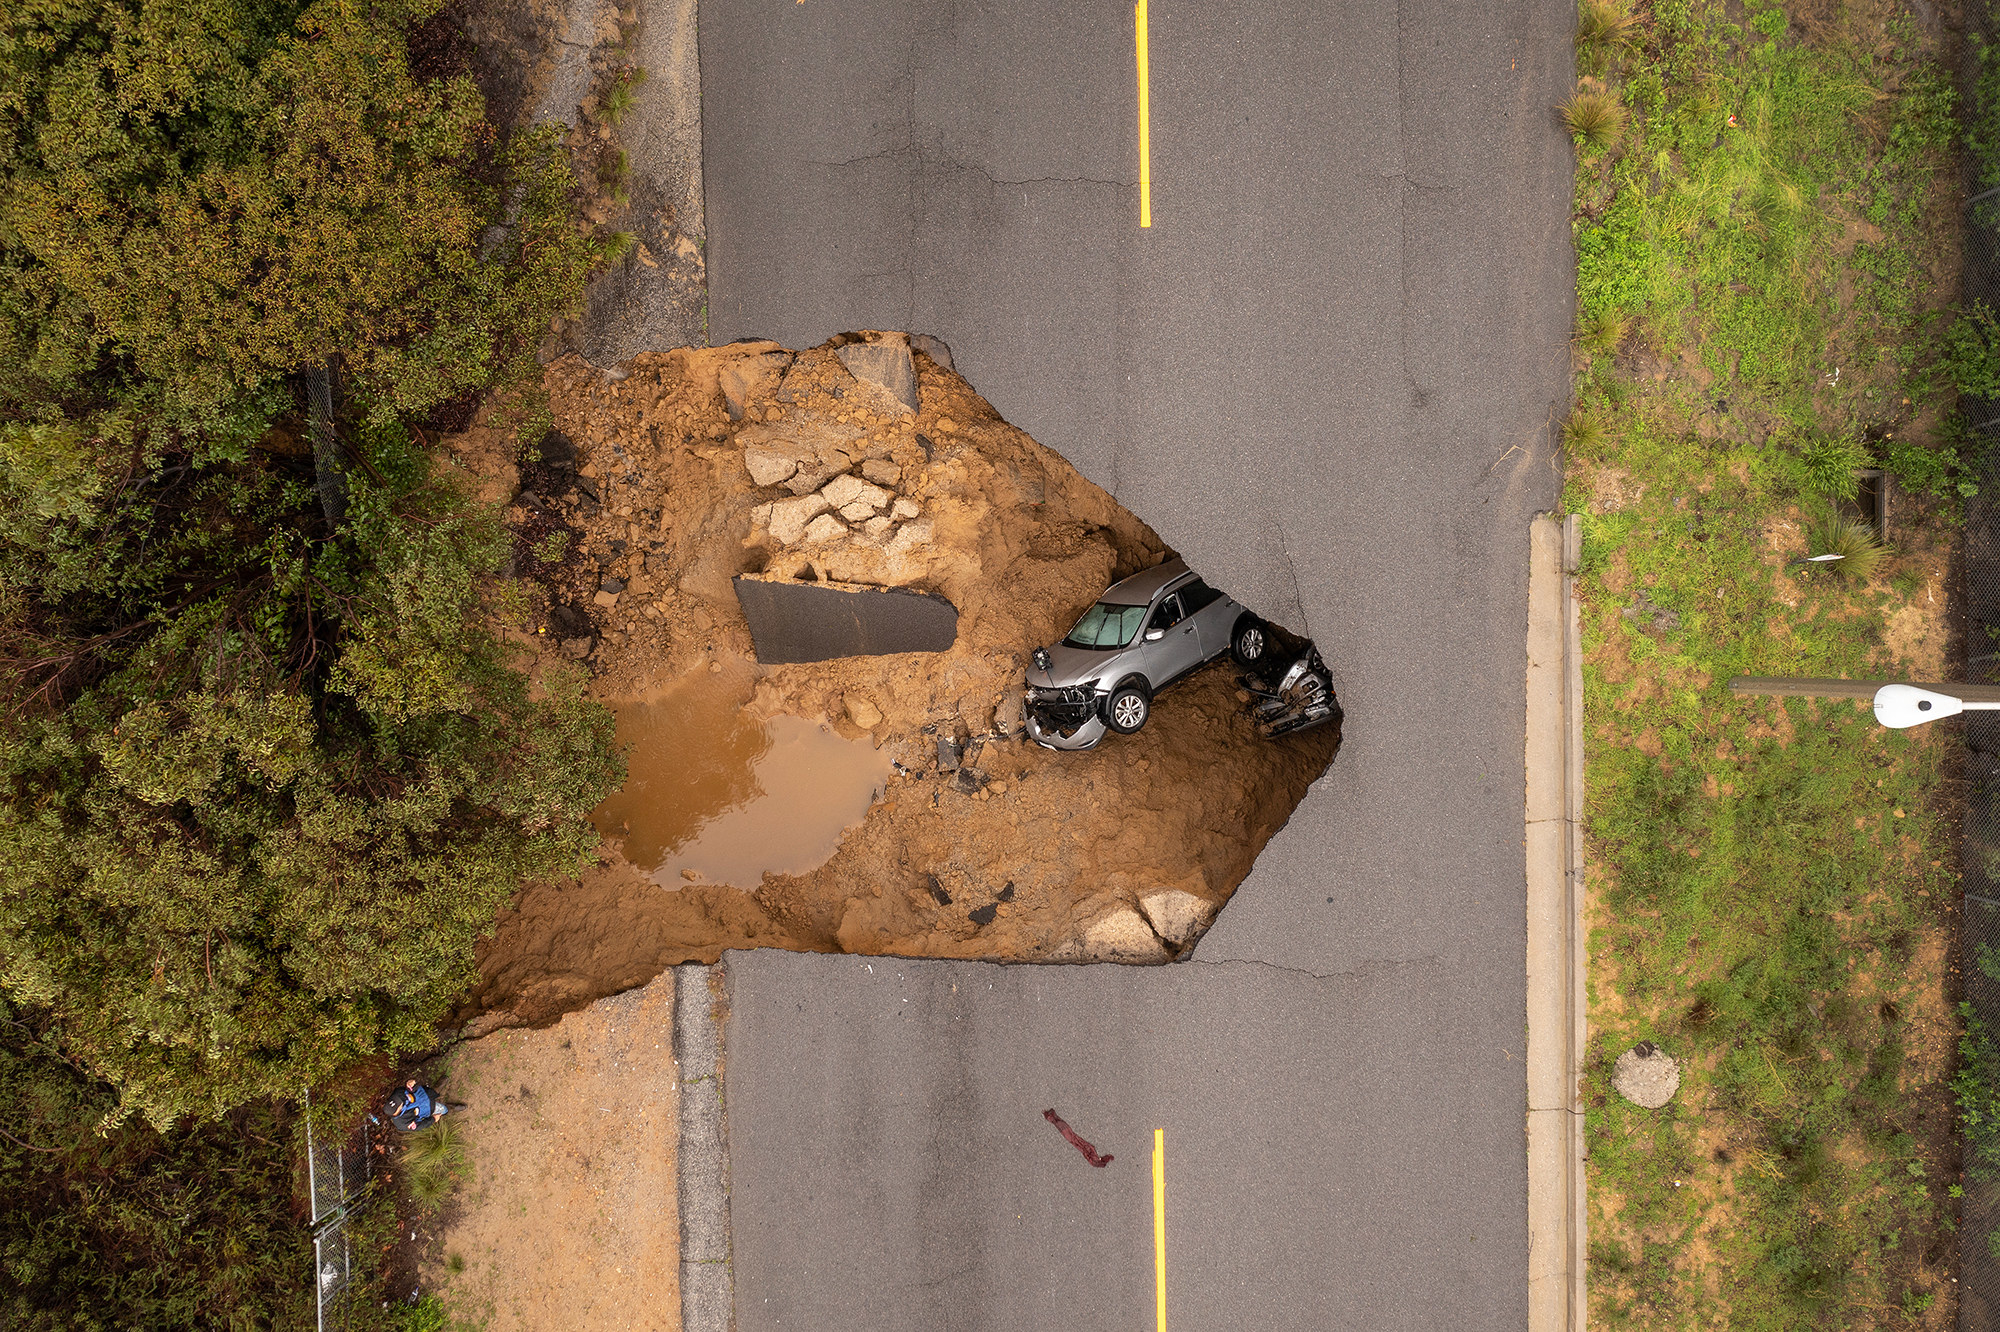 Aerial shot of a sinkhole on an open road. Inside the sinkhole are a car and a pickup truck